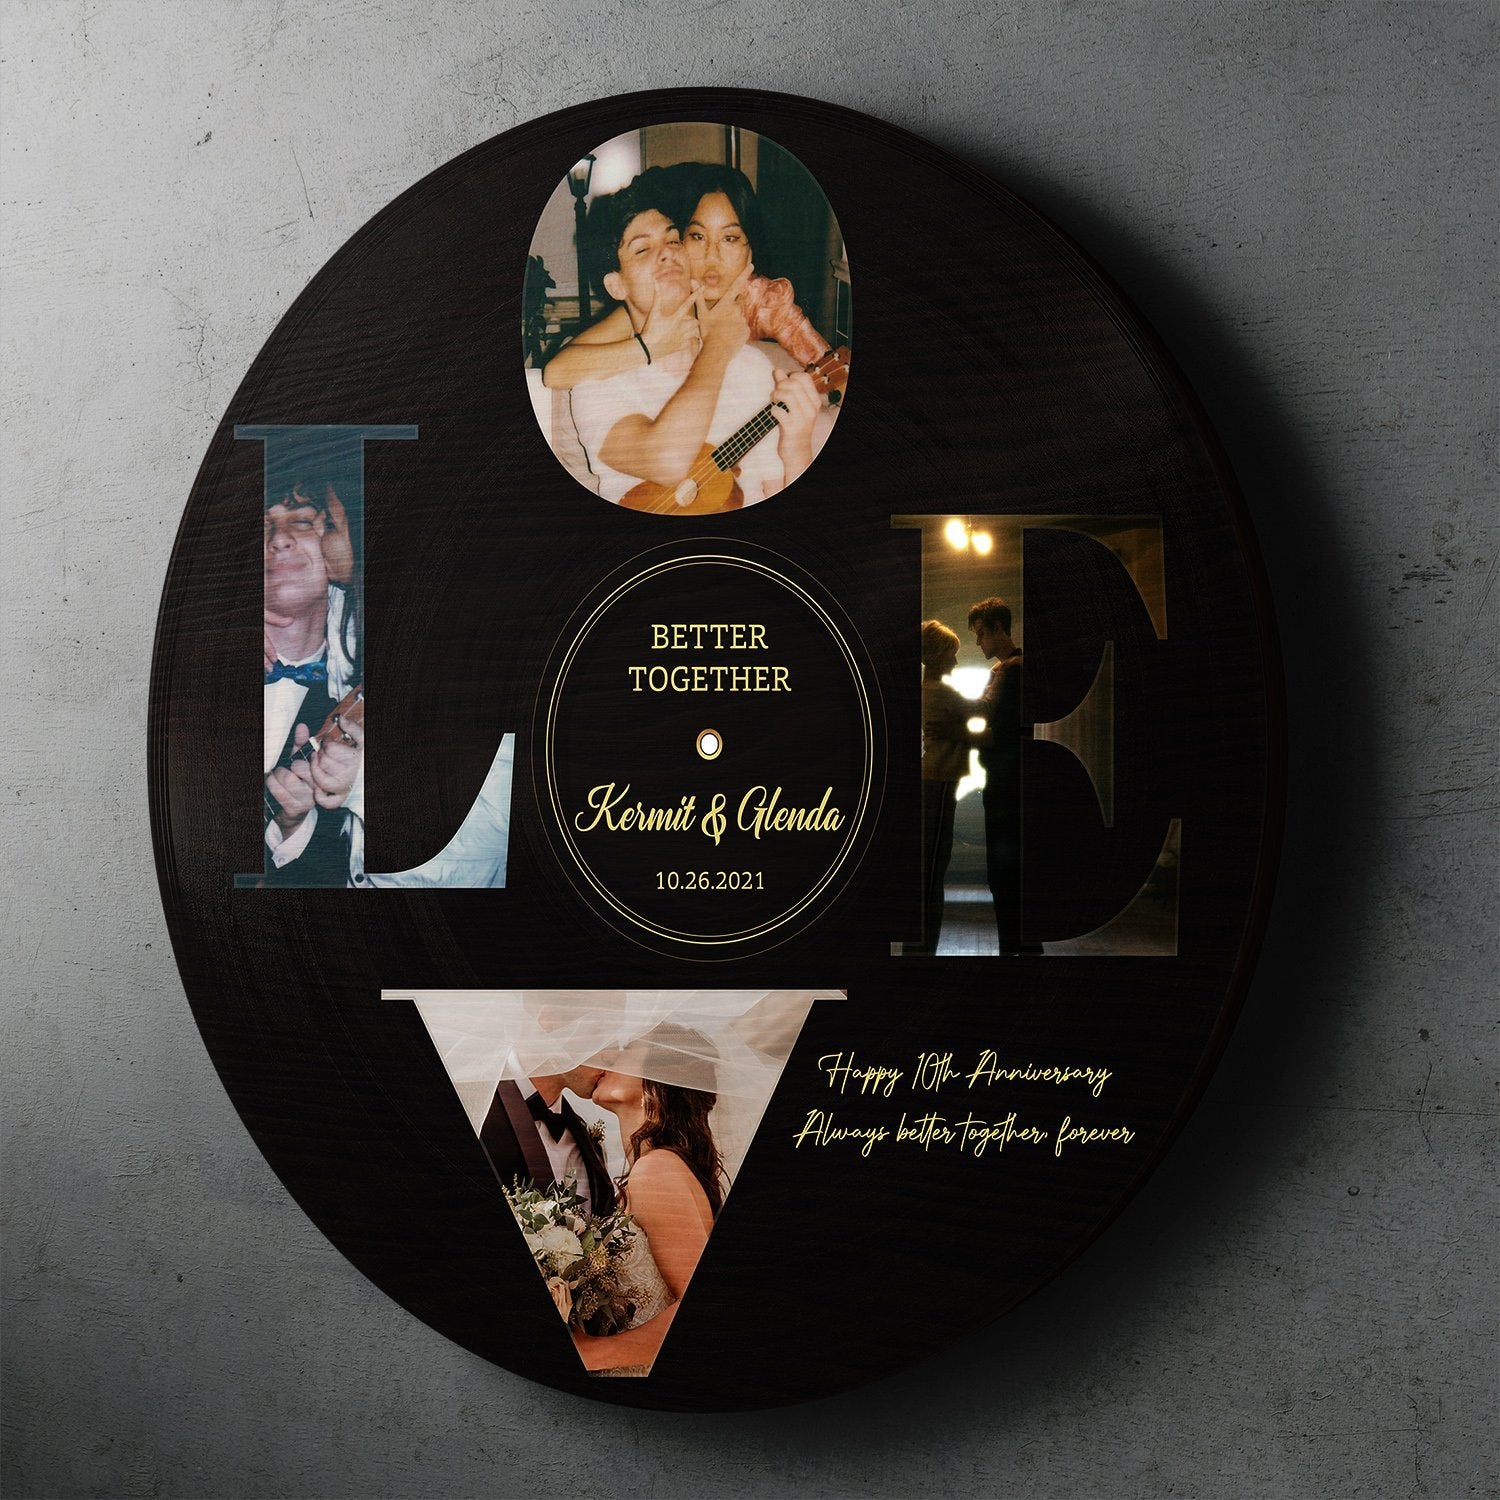 Custom Photo Vinyl Record, Personalized Name And Text, Love, Round Wood Sign